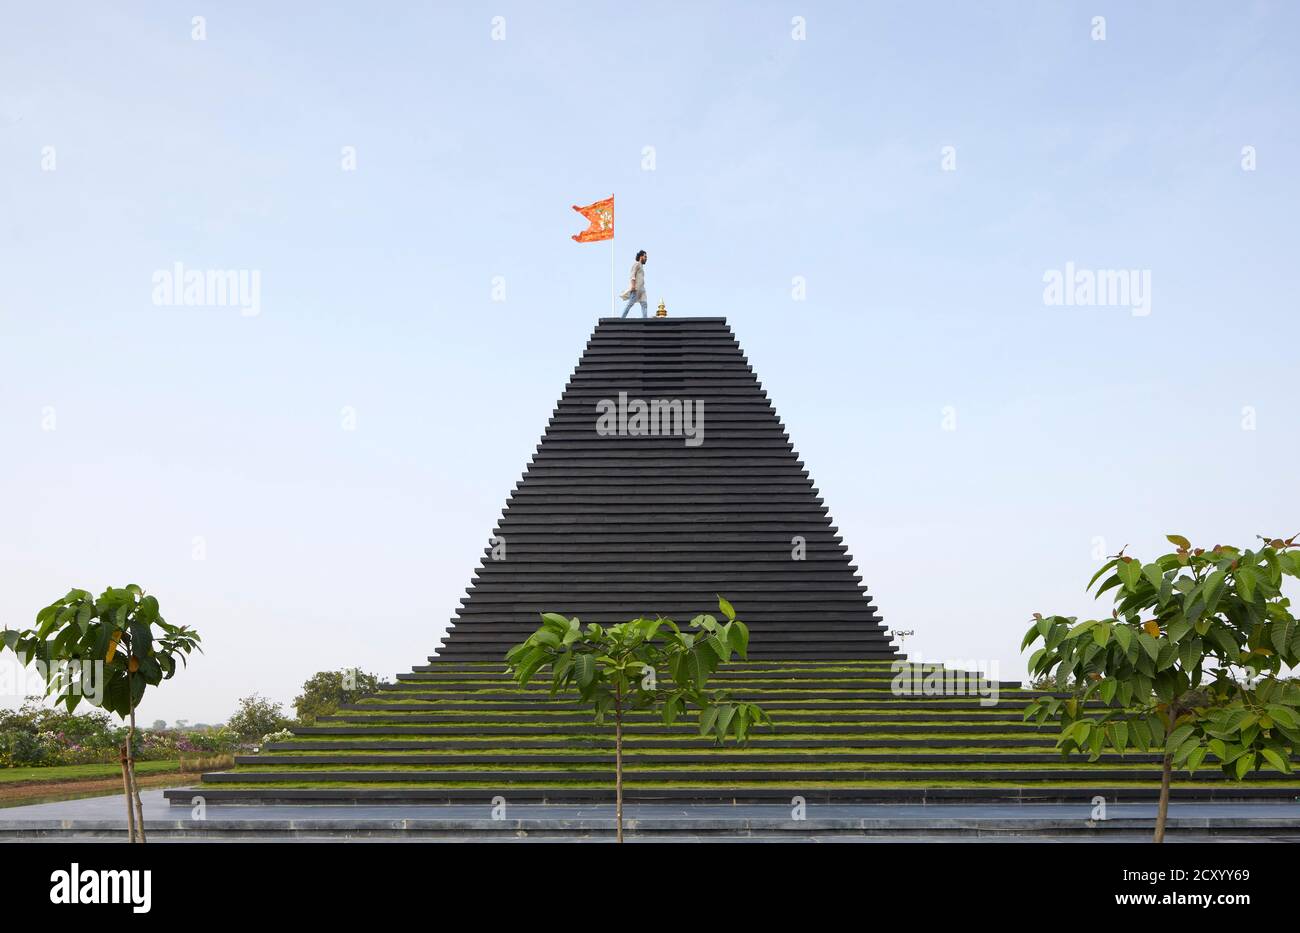 Side view of temple with figure on roof. Balaji Temple, Andhra Pradesh, India. Architect: Sameep Padora and associates , 2020. Stock Photo